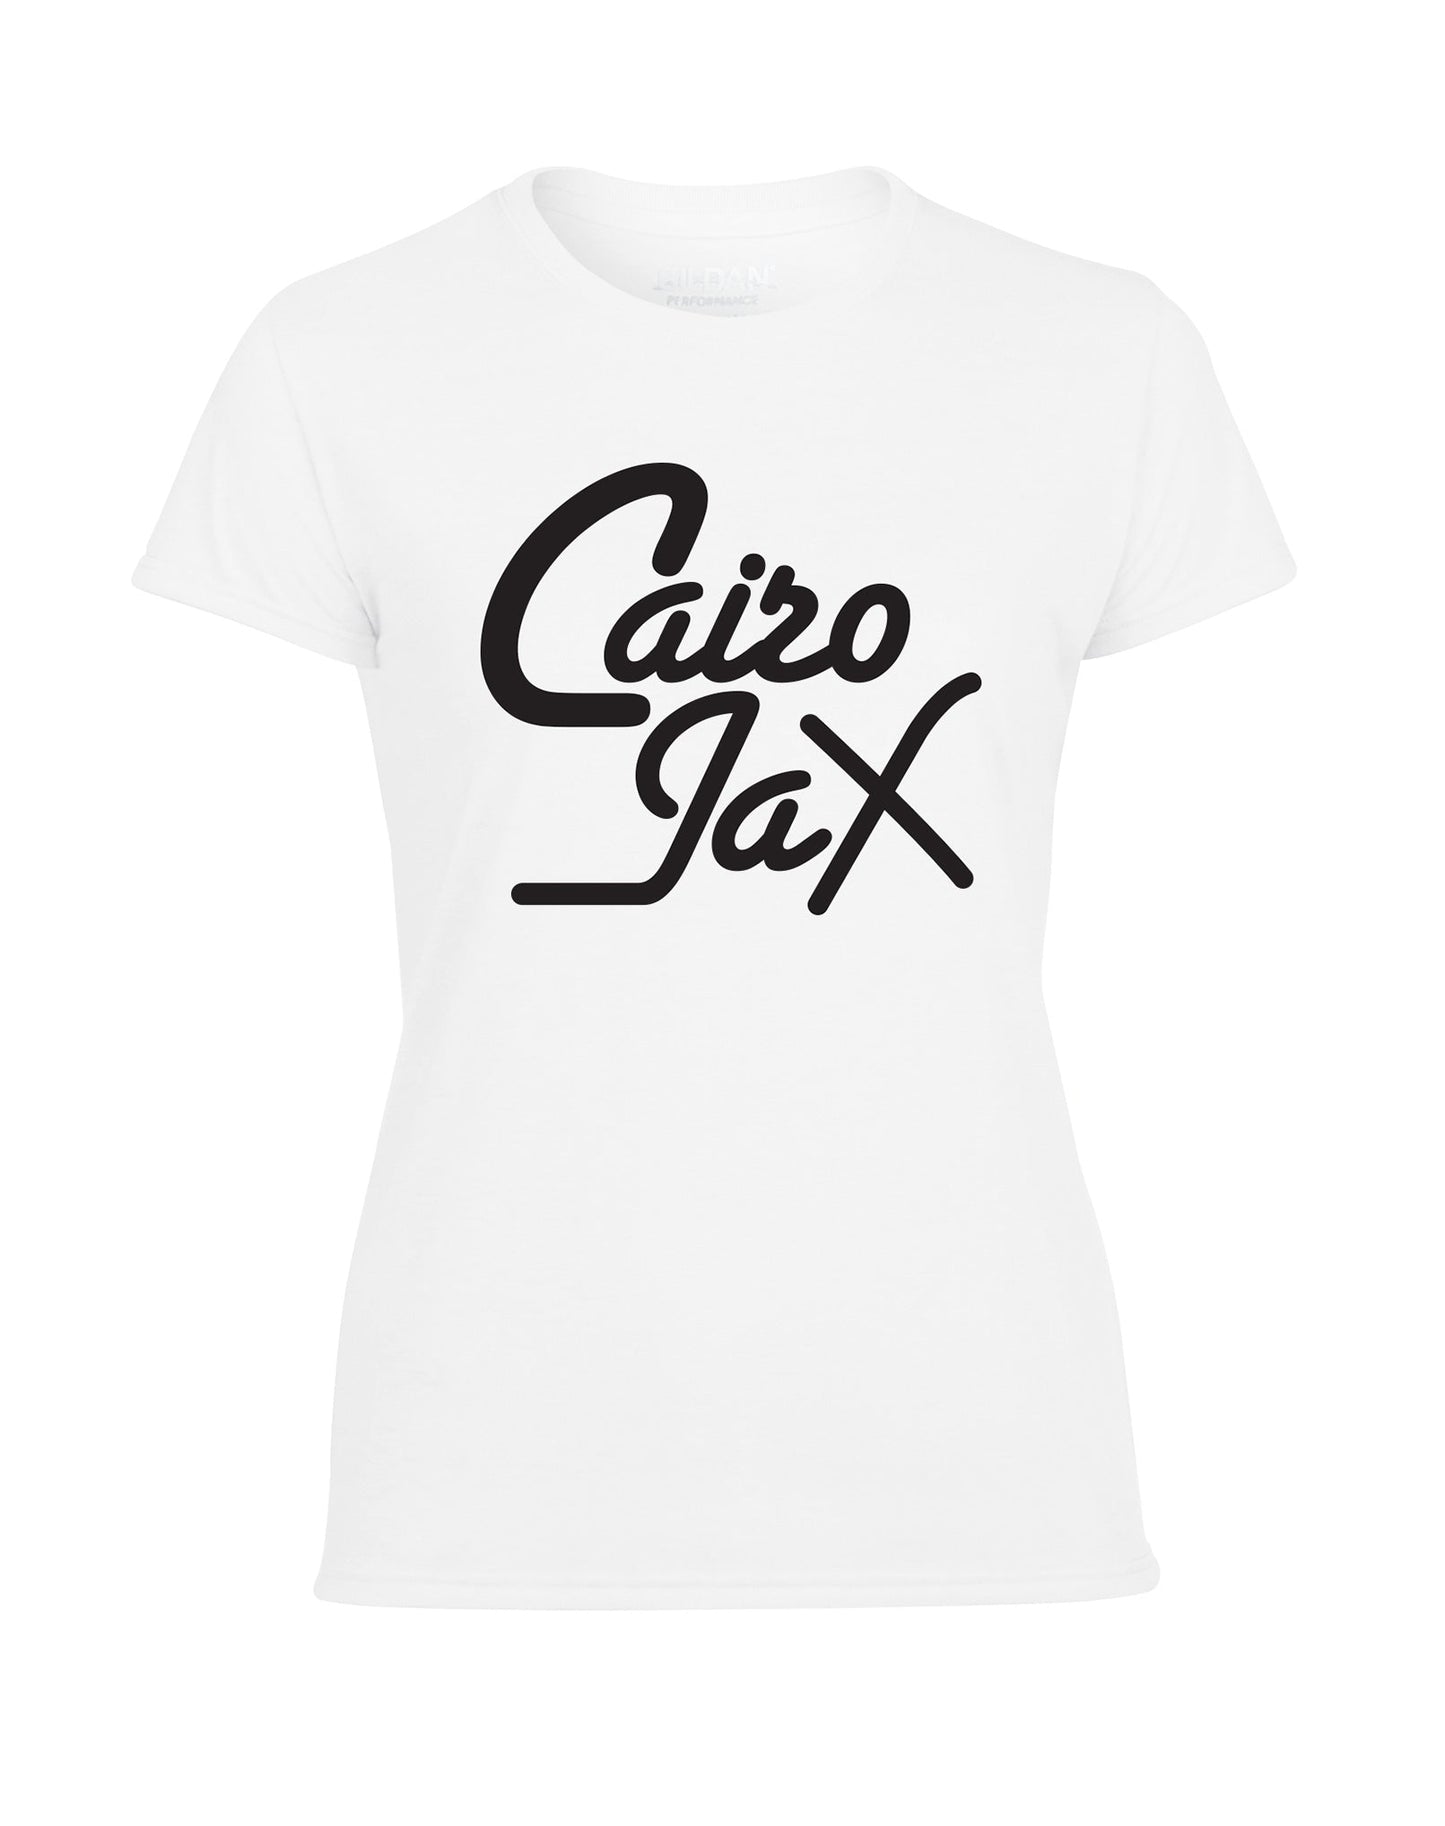 Cairo Jax ladies fit t-shirt- various colours - Dirty Stop Outs